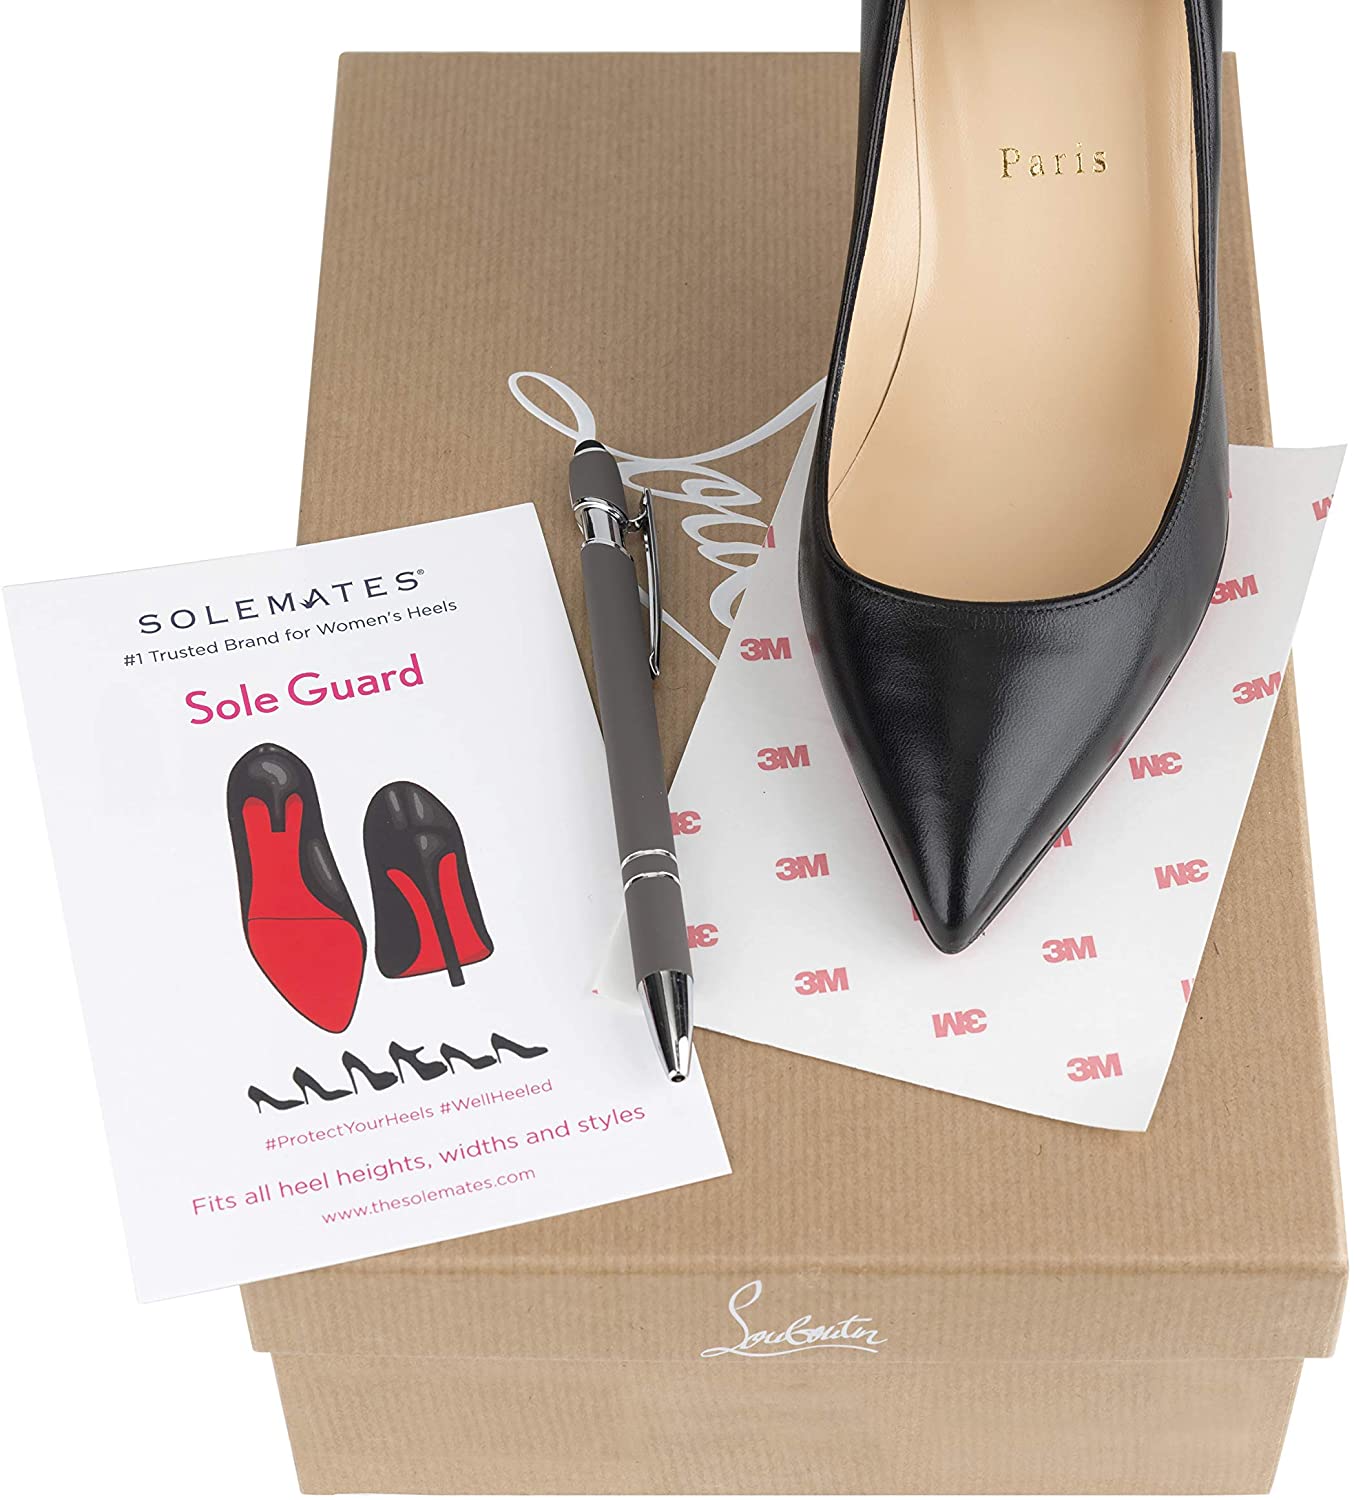 Sole Savior- (3 Pair!) Compatible Louboutin Sole Protector for Christian Louboutin Shoes, Red Bottom Protectors for Luxury Shoes- Christian